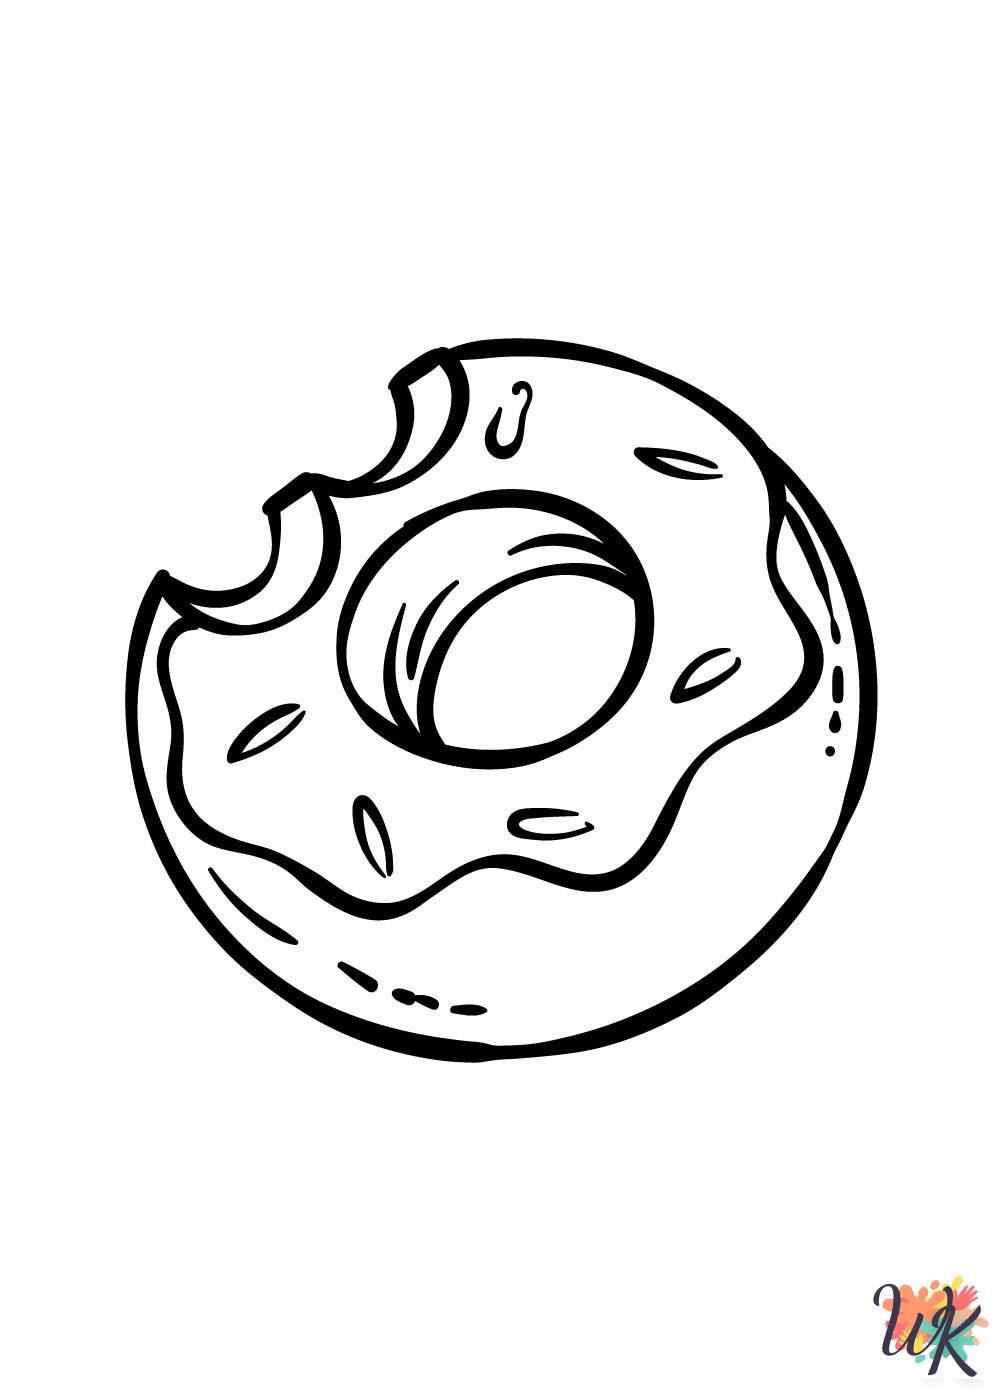 free Donut coloring pages for adults